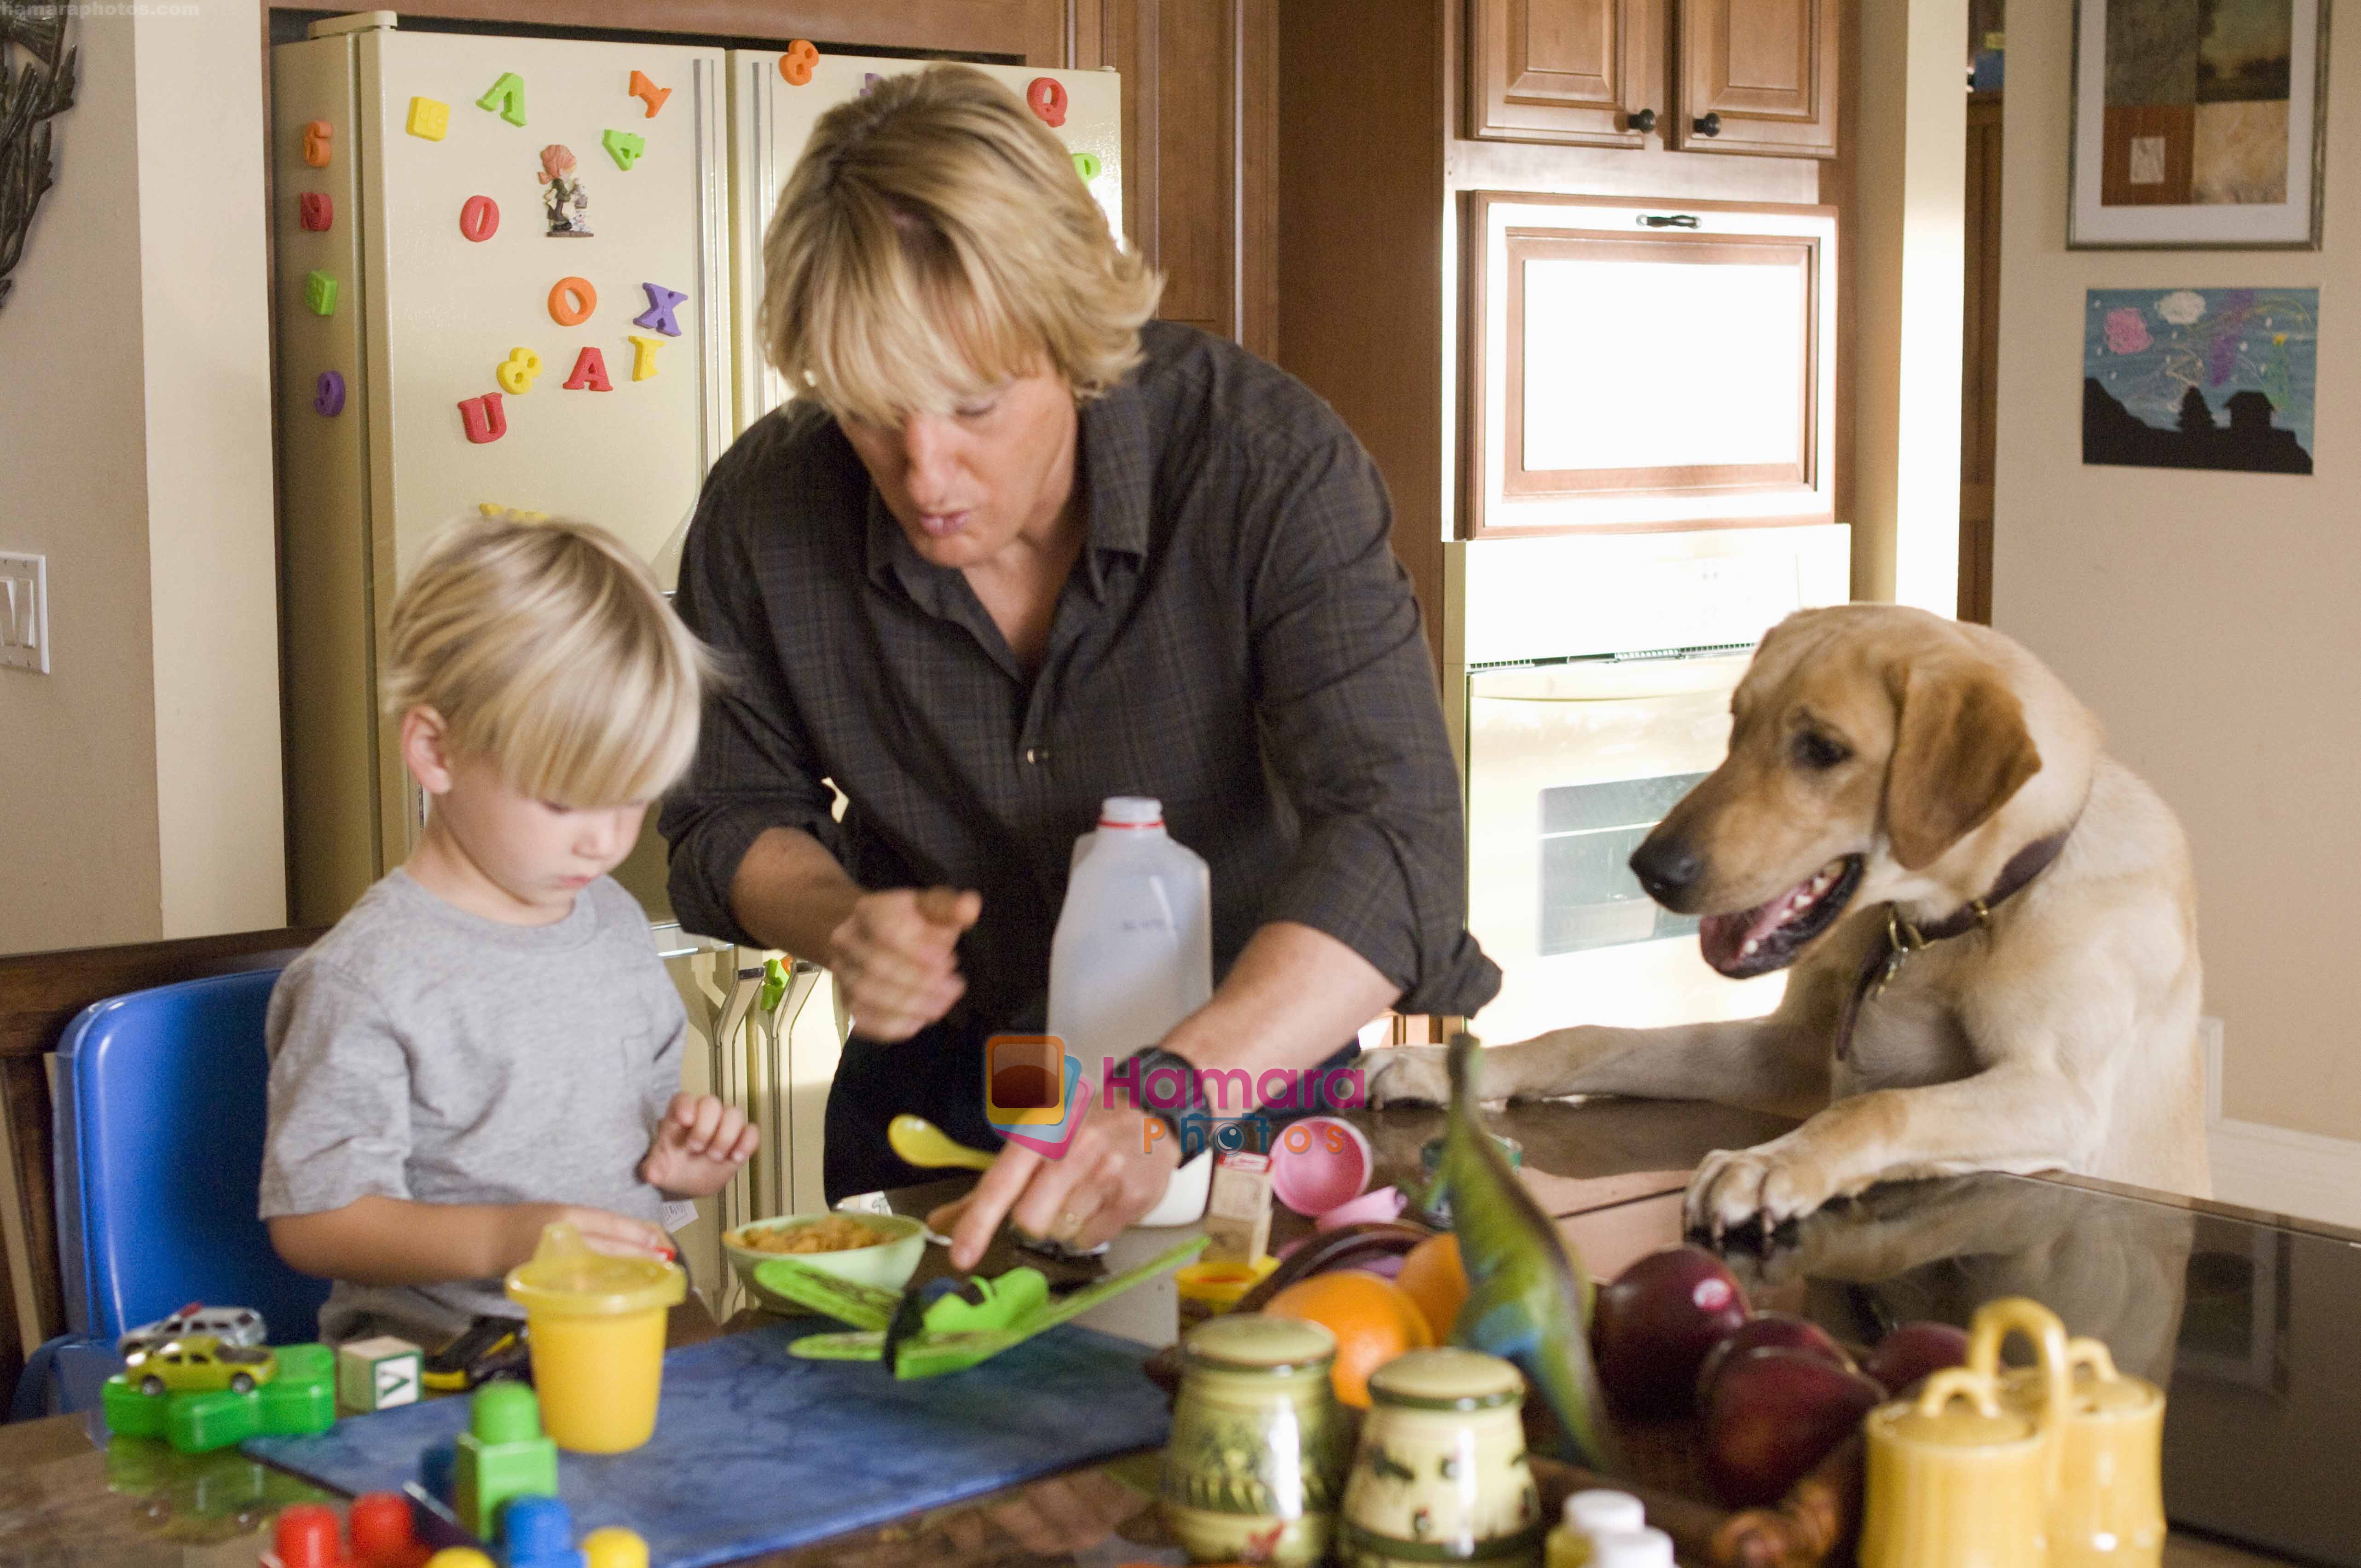 in the still from movie Marley & Me